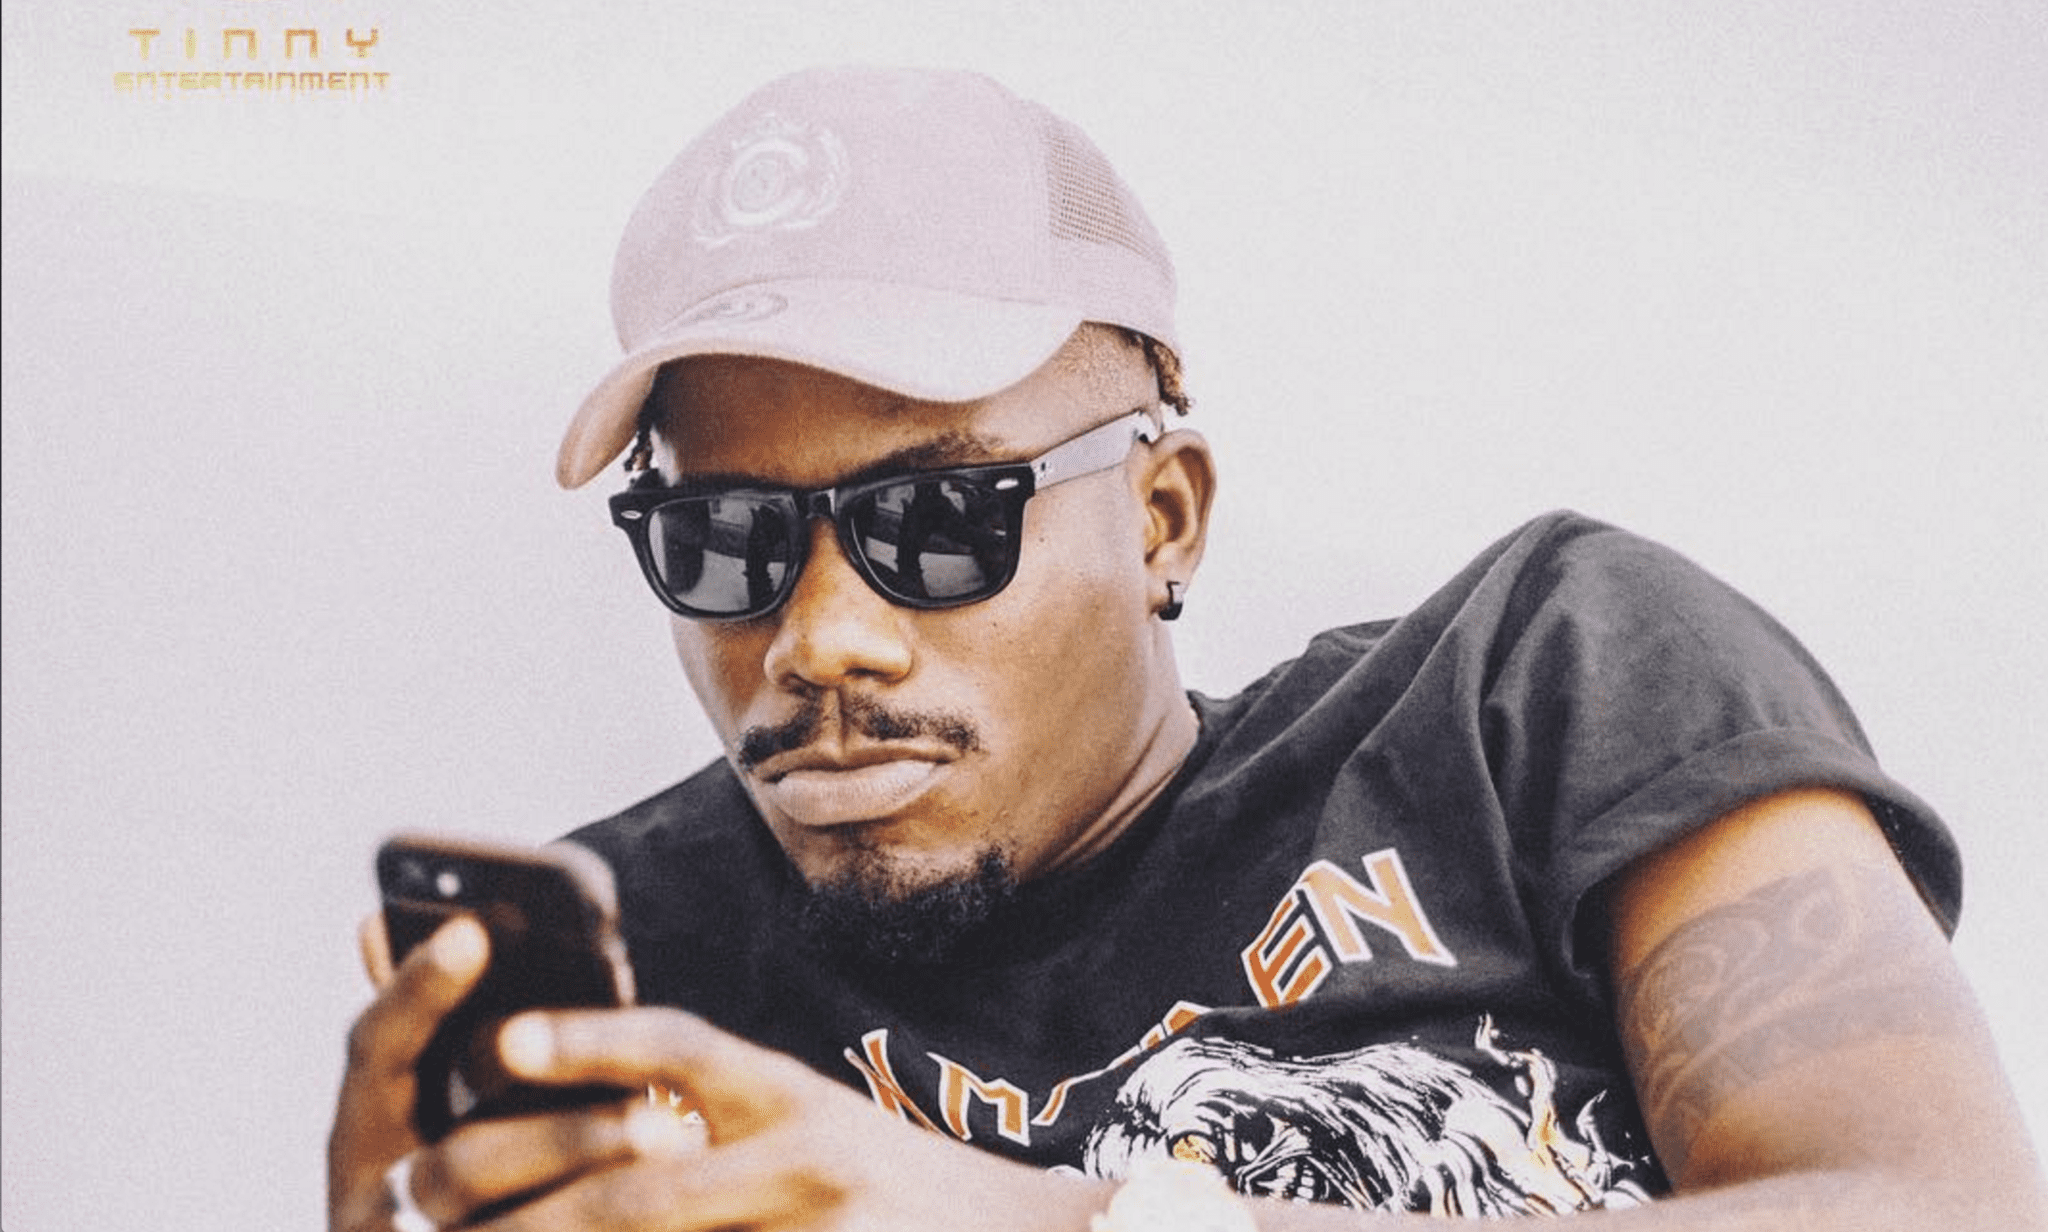 Developing story: YCee has had it with unfair record deals